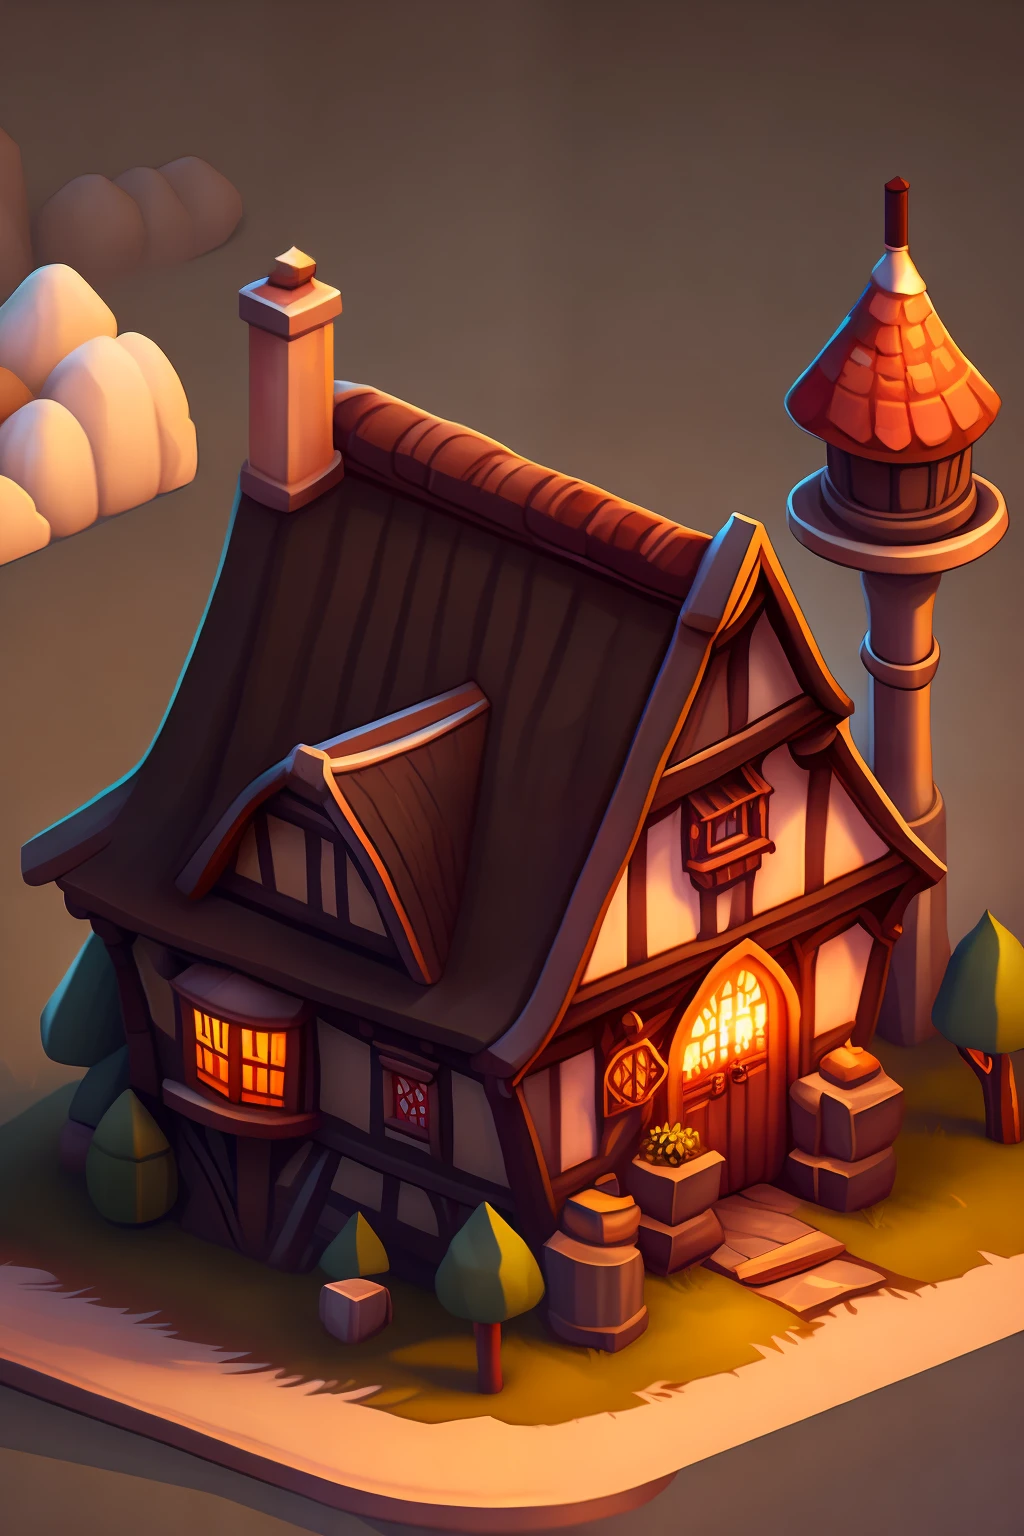 tmasterpiece，optimum，Impeccable，A close-up of a small house with a chimney and a fire, Stylized game art, a multidimensional cozy tavern, Stylized concept art, 3 d render stylized, stylized 3d render, Detailed game art, painted as a game concept art, andreas rocha style, game assets, rpg game environment asset, medieval village, isometric 2 d game art